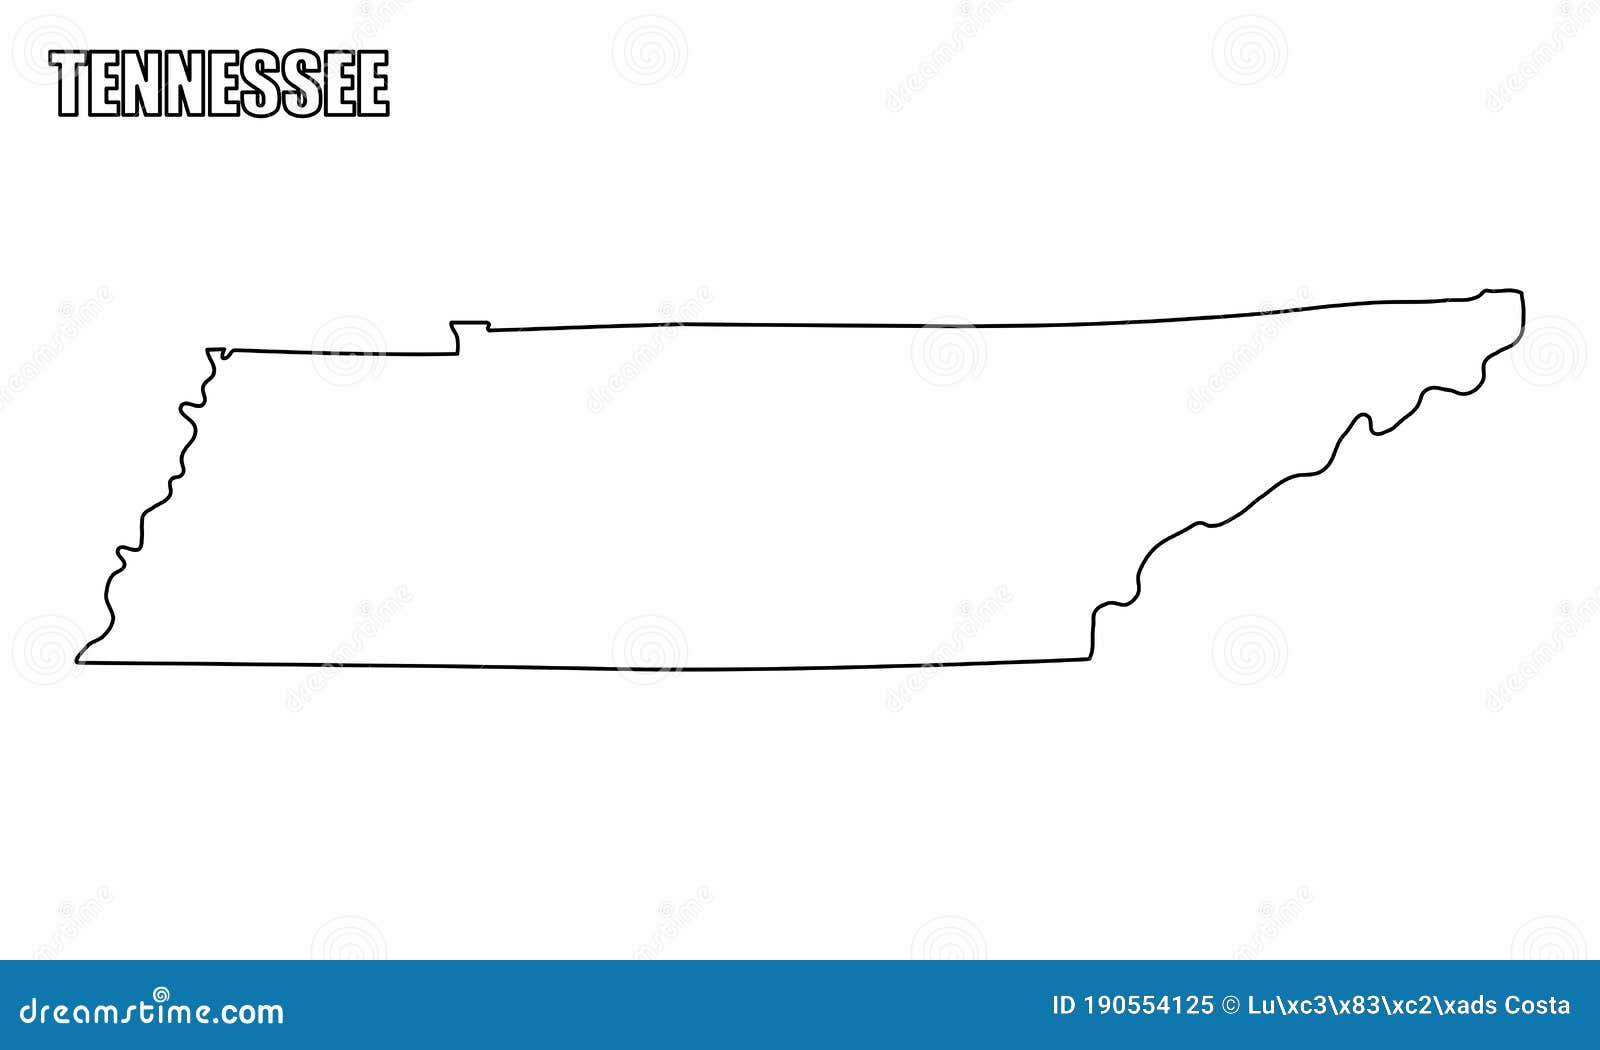 Tennessee Outline Map Stock Illustration Illustration Of Geography